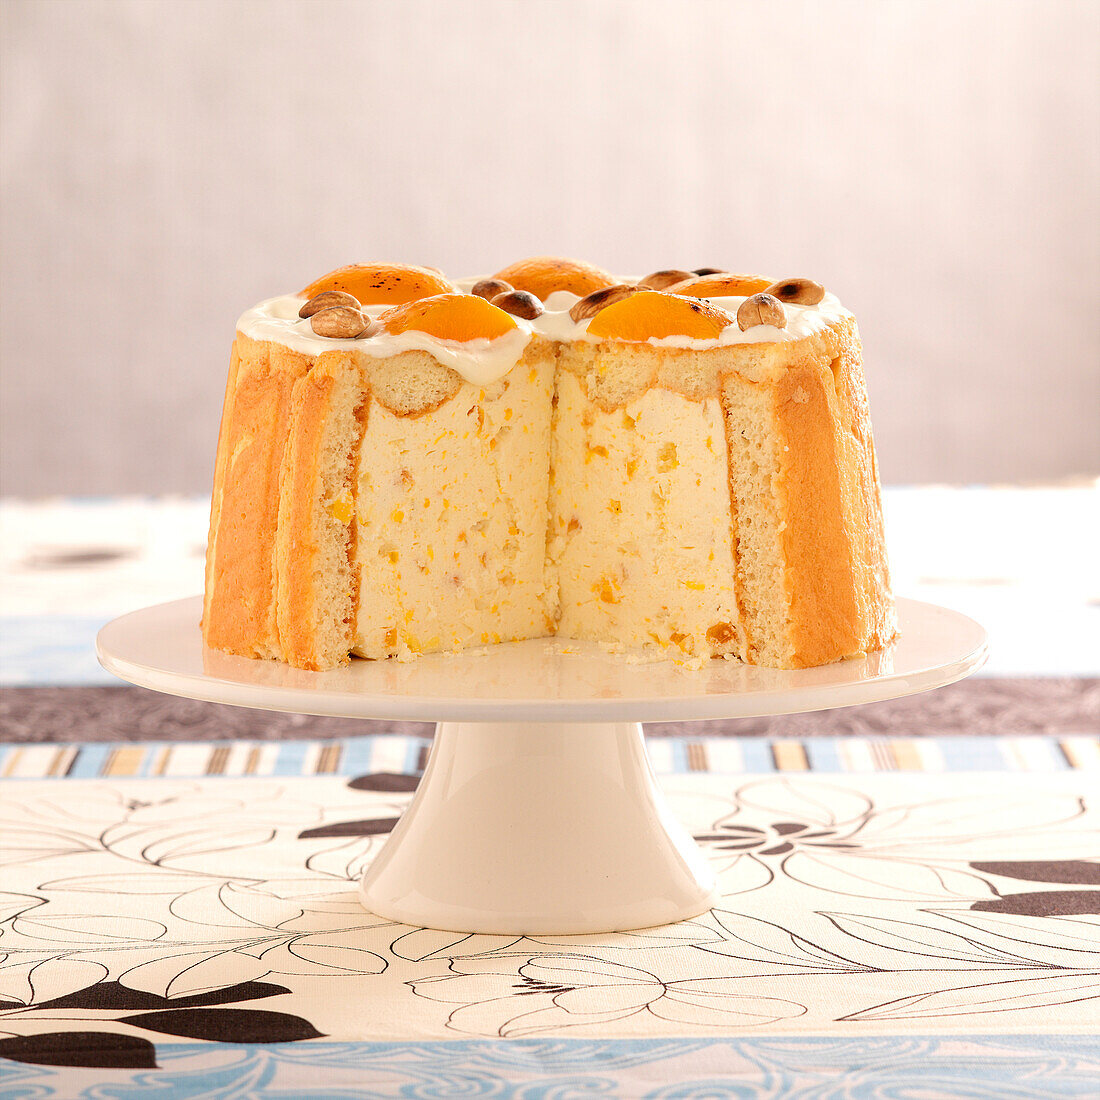 Apricot and almond Charlotte